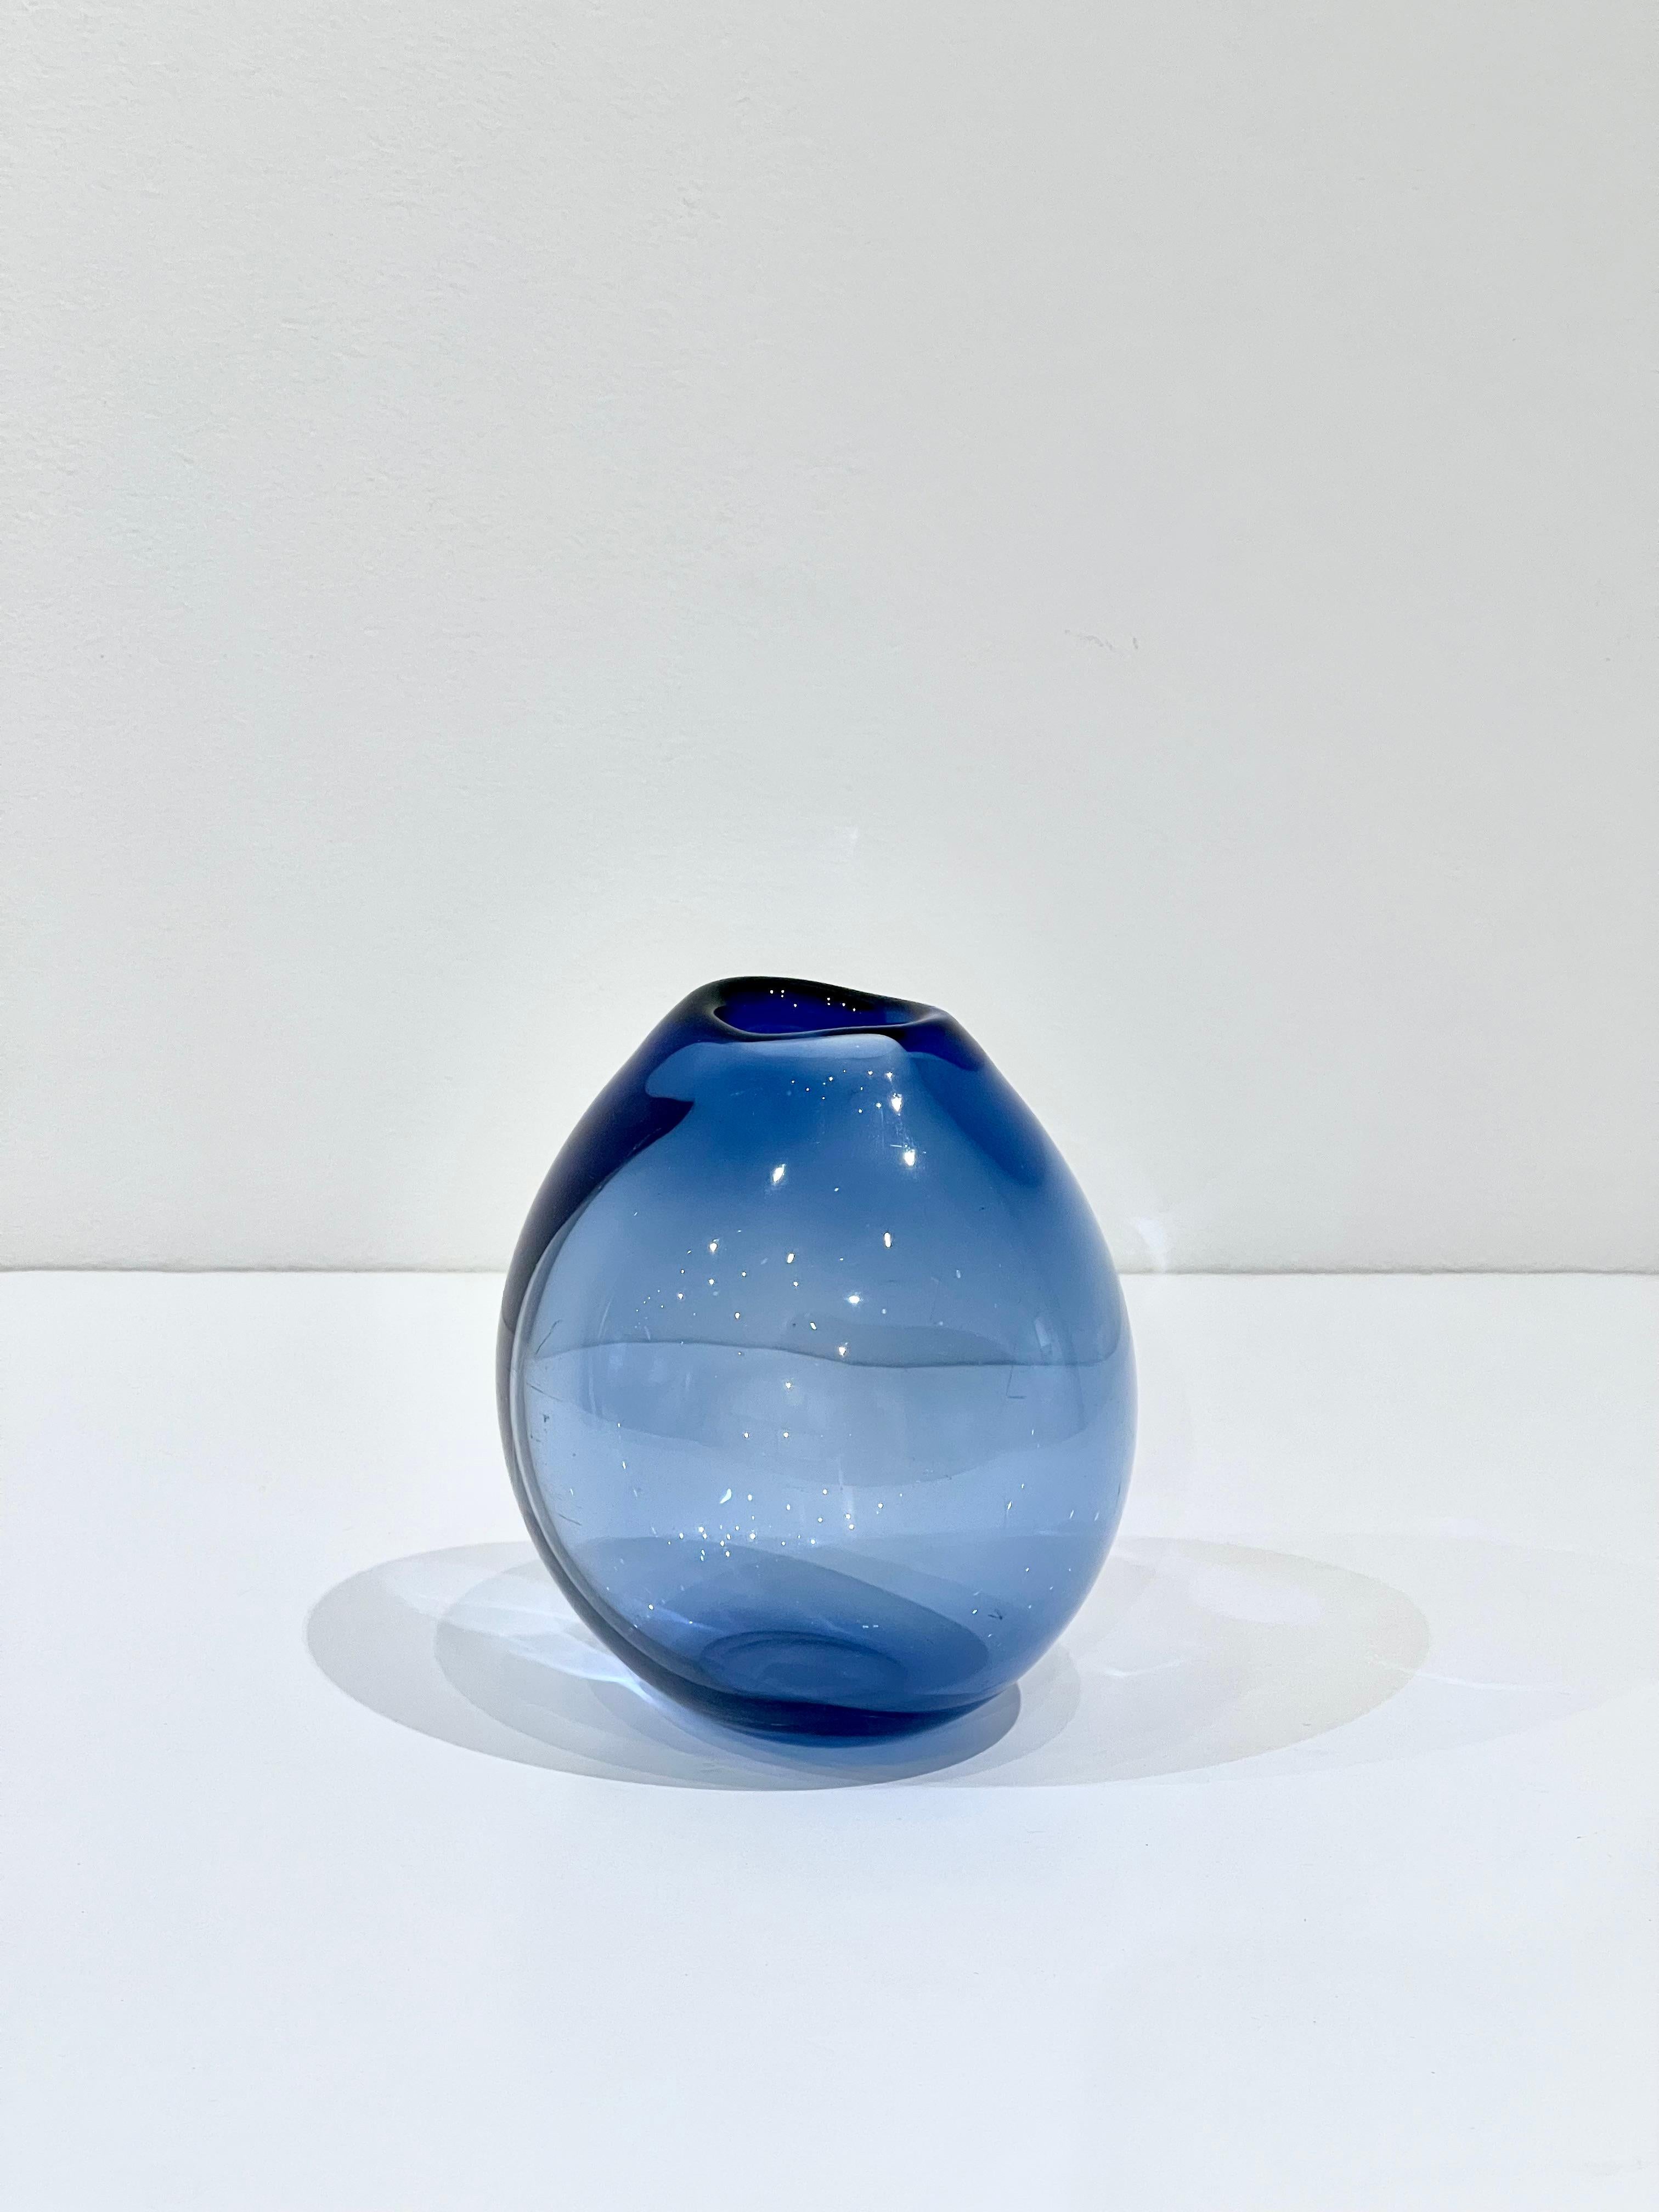 Small Handblown blue glass vase by Per Lutken for Holmegaard. Made in Denmark, circa 1960's. Signed on the bottom.